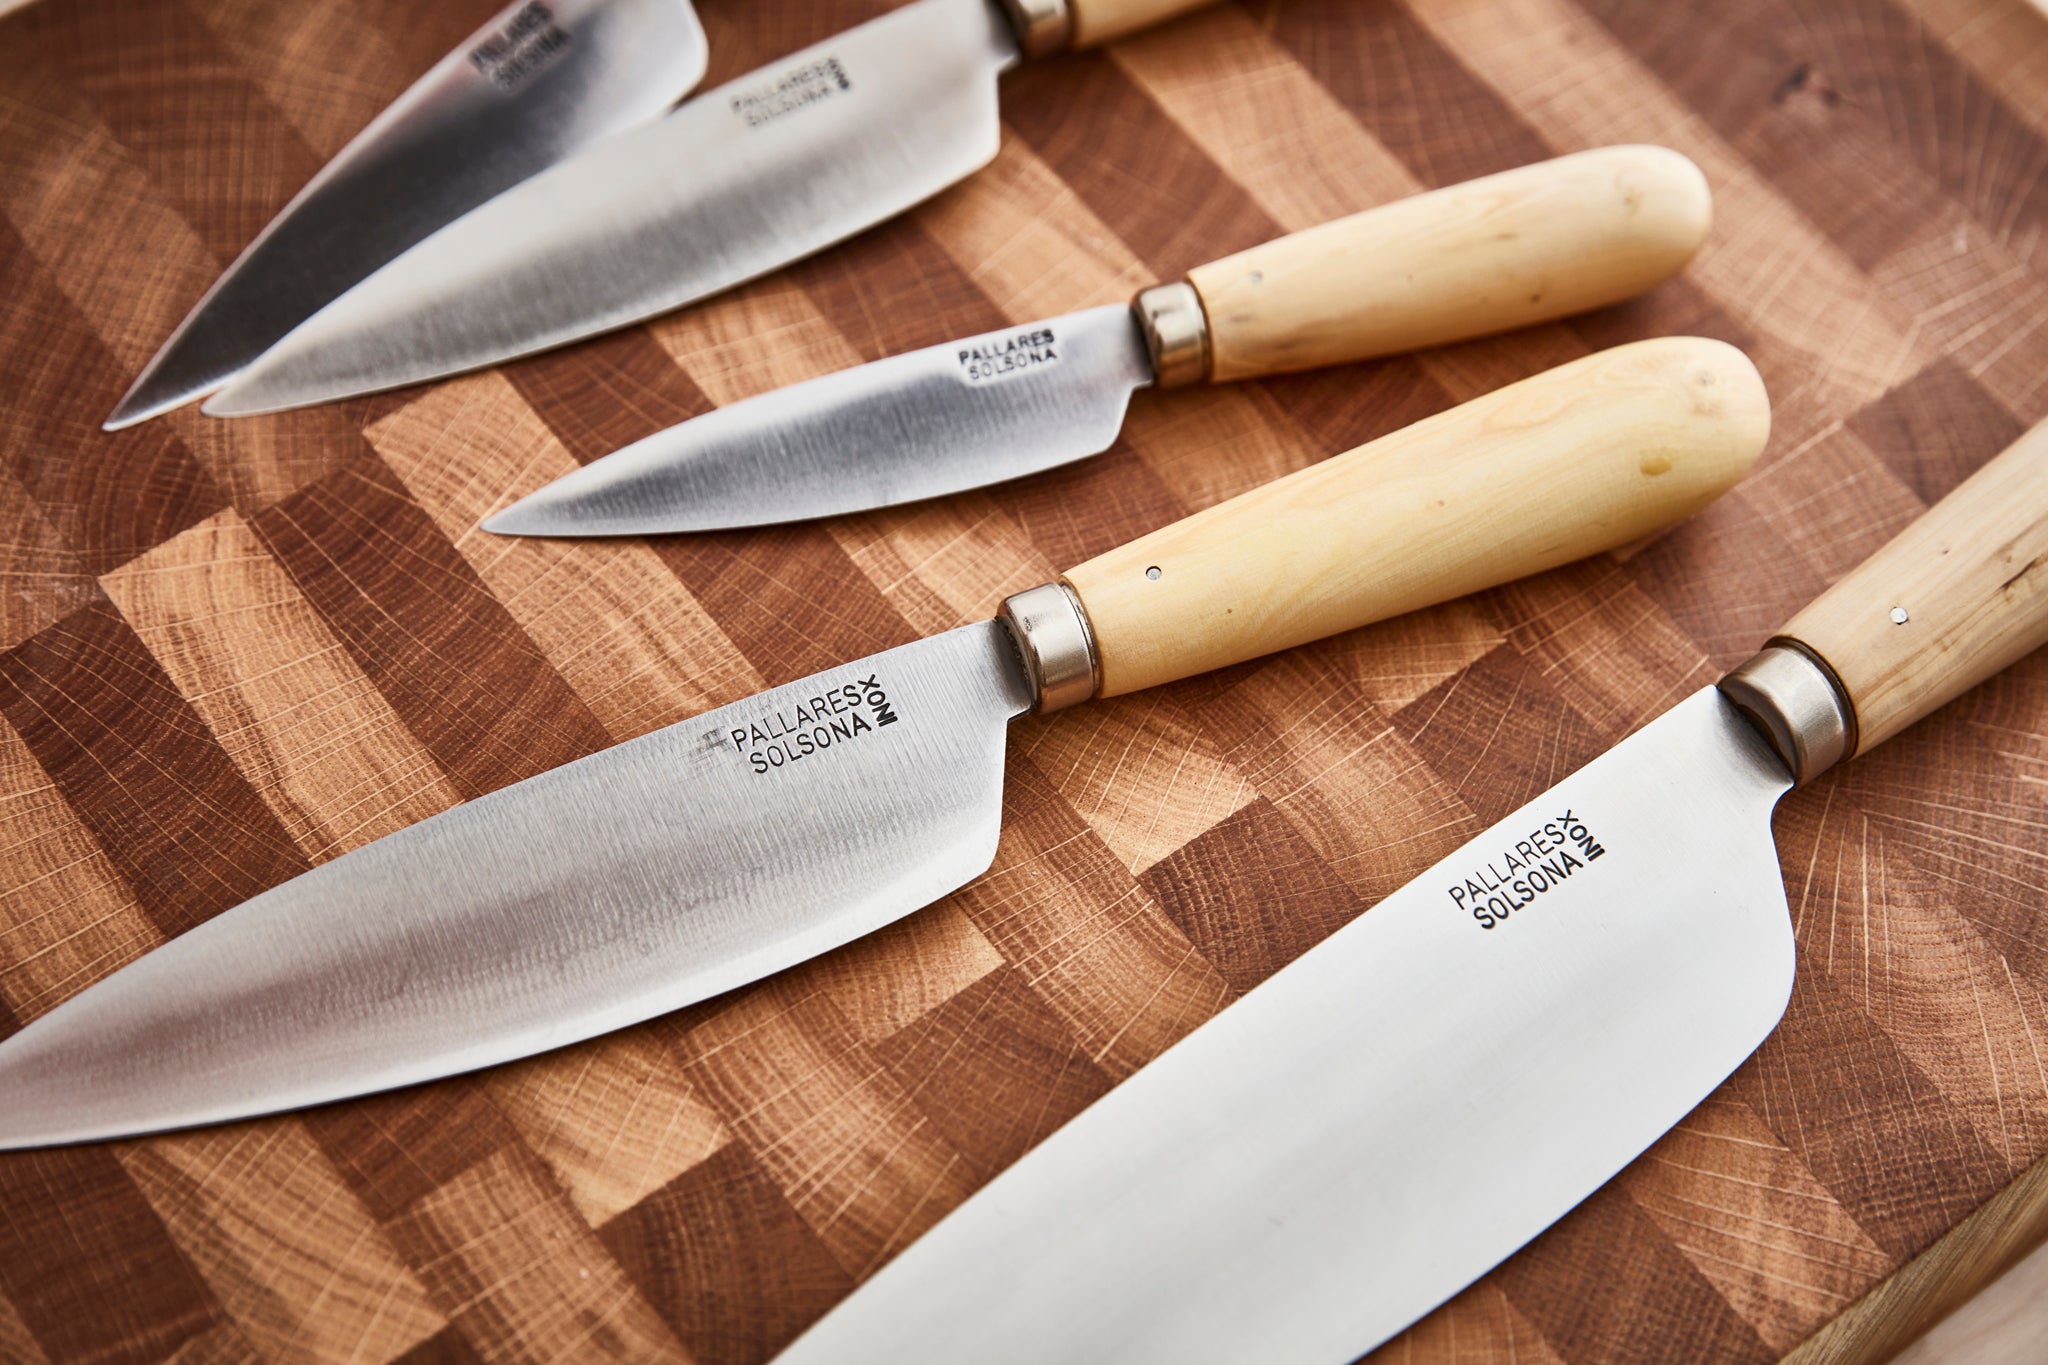 Spanish Pallares Solsona kitchen knives with long curved cutting edge and boxwood handles